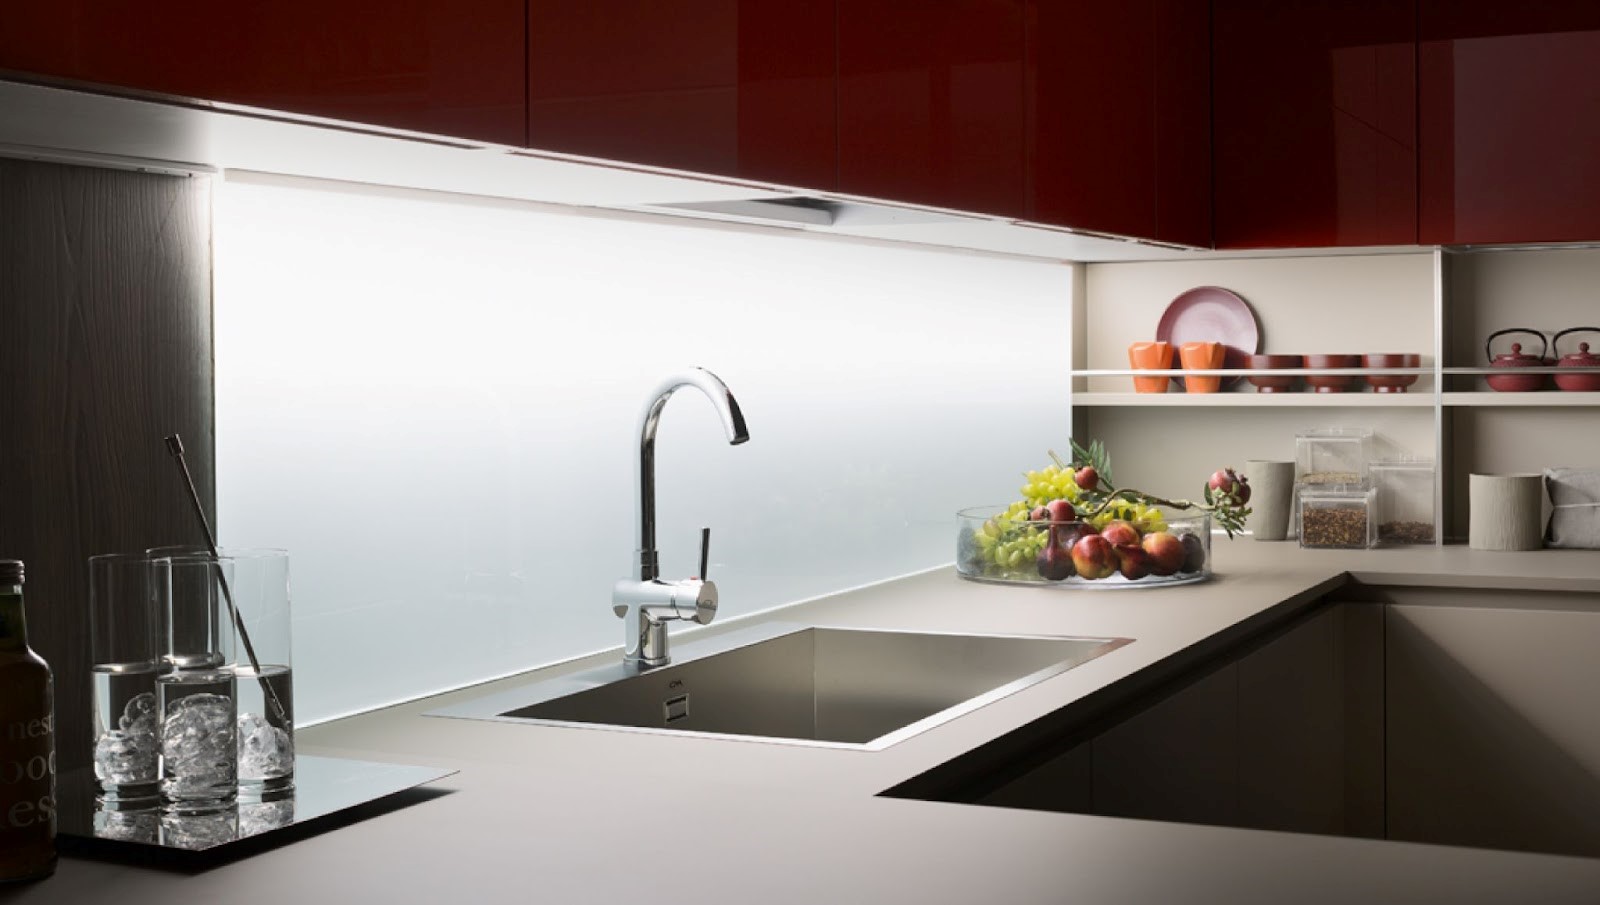 Illuminating Kitchen Cabinets With These Smart Lights